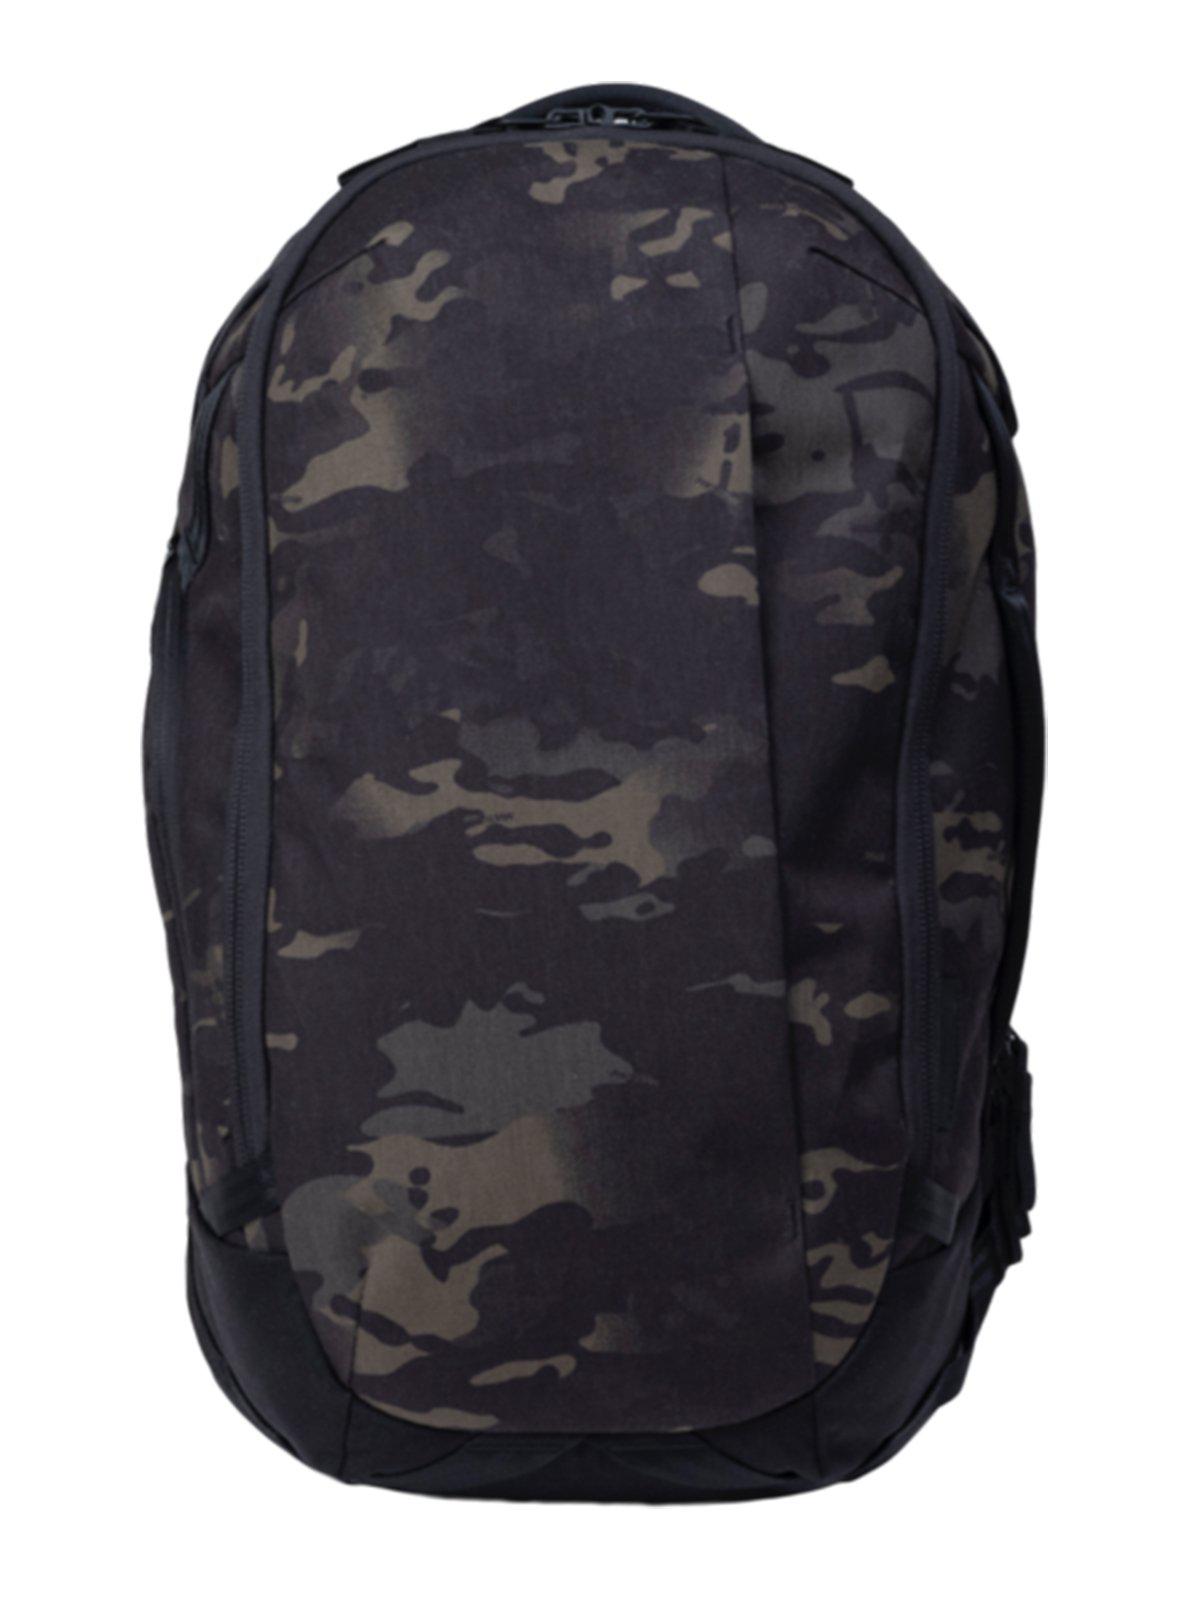 Able Carry Max Backpack Dark Forest Multicam